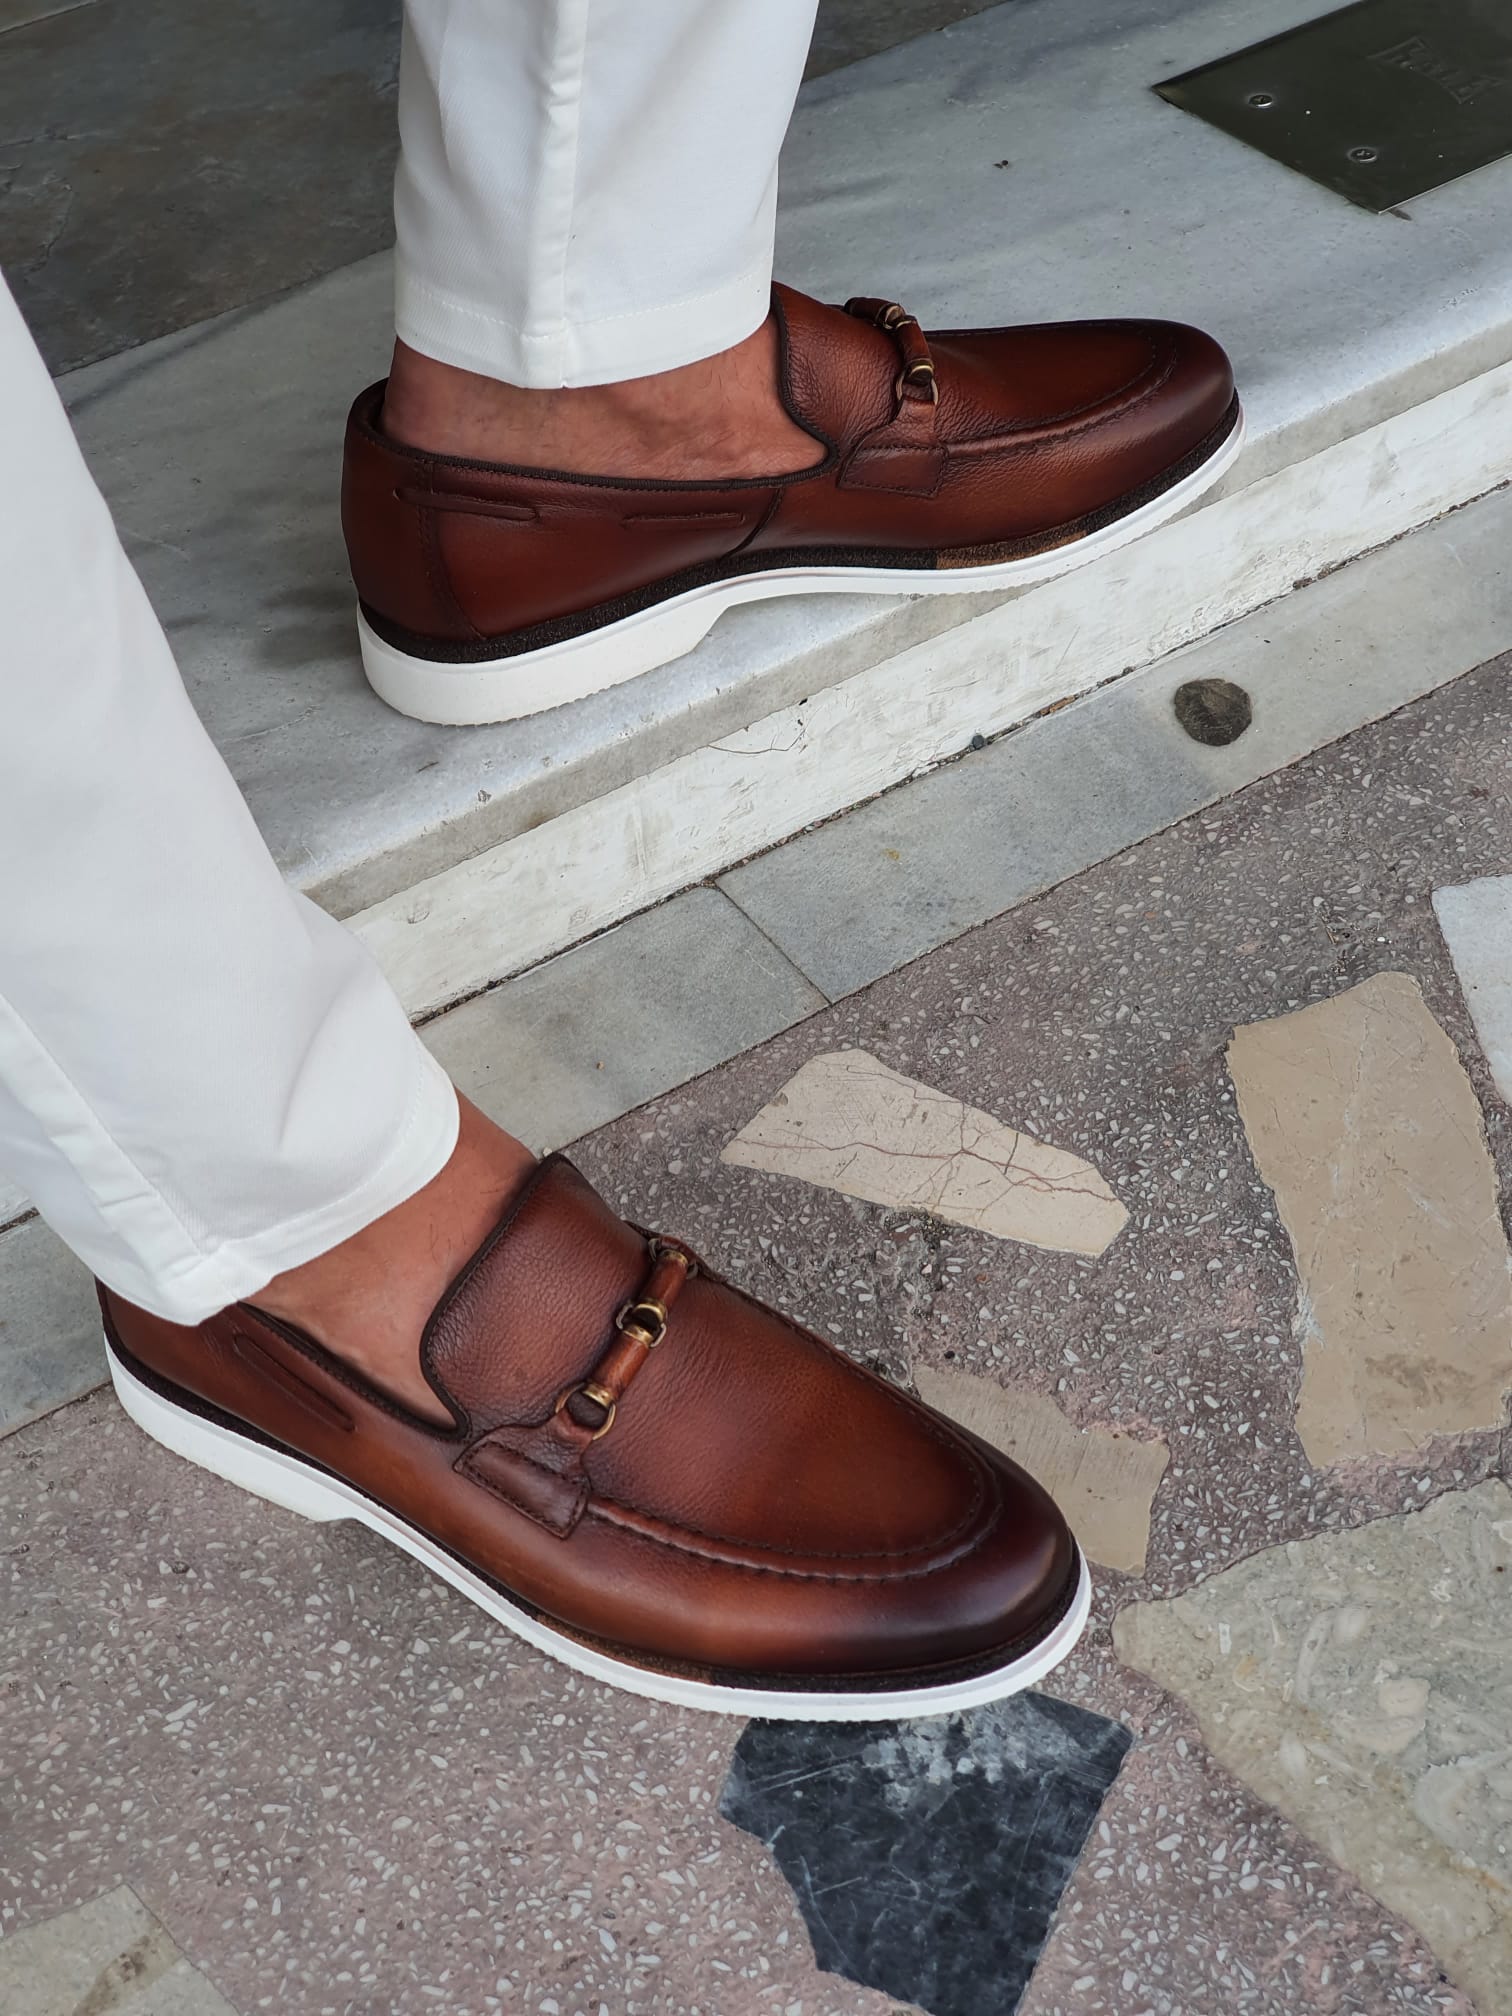 TAN SARDINELLI EVA SOLE WITH BUCKLE DETAILED CALF LEATHER SHOES